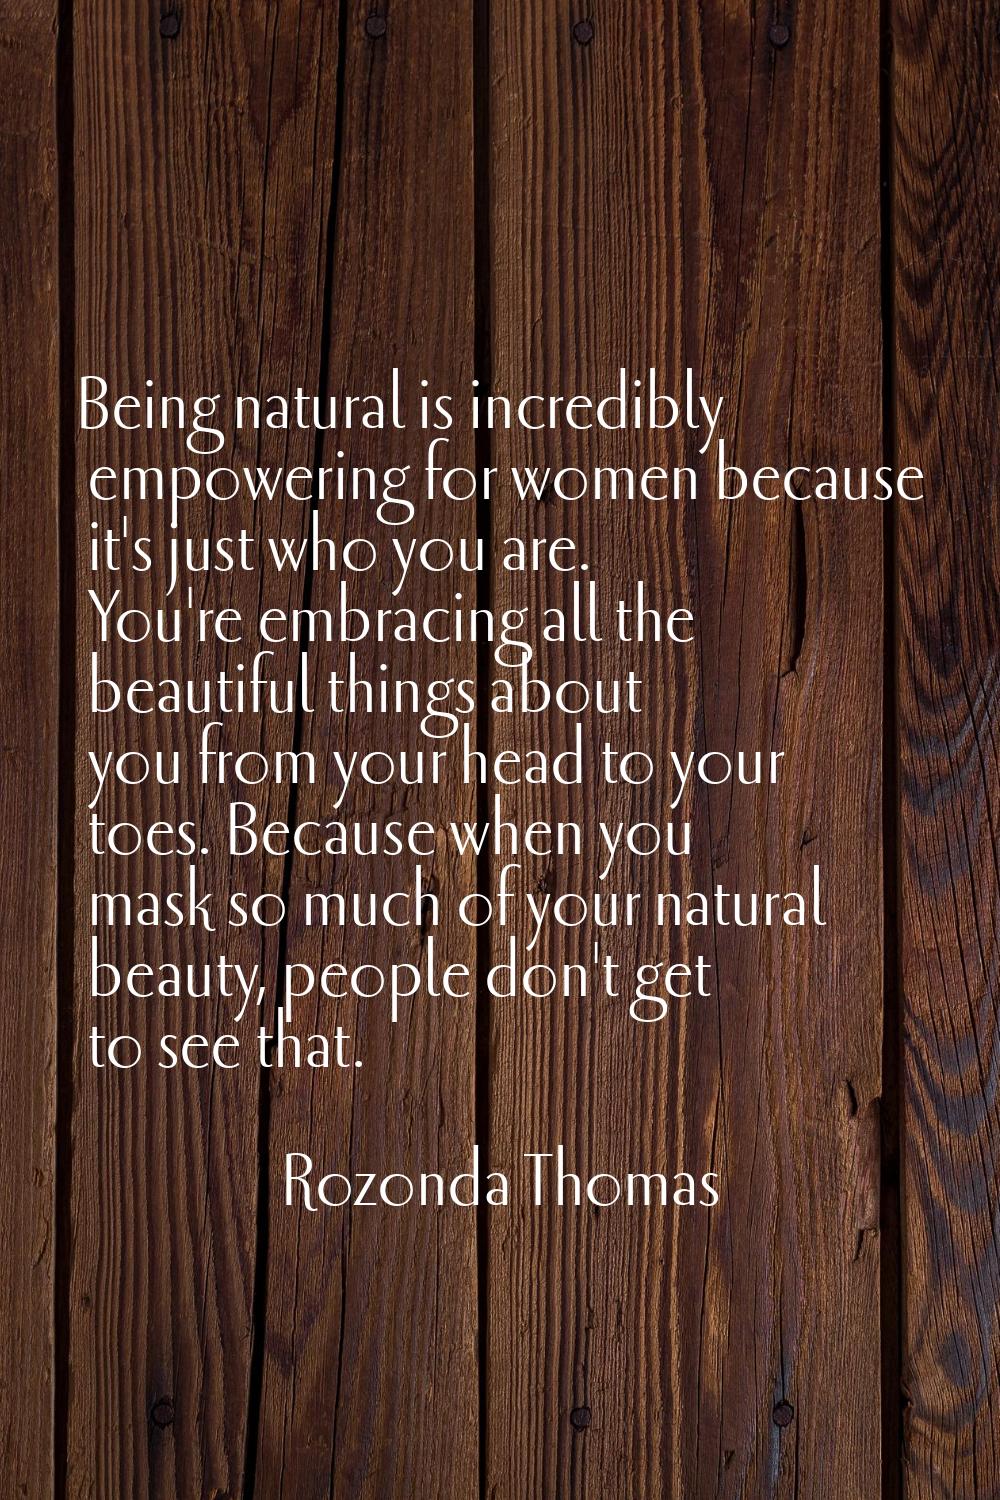 Being natural is incredibly empowering for women because it's just who you are. You're embracing al